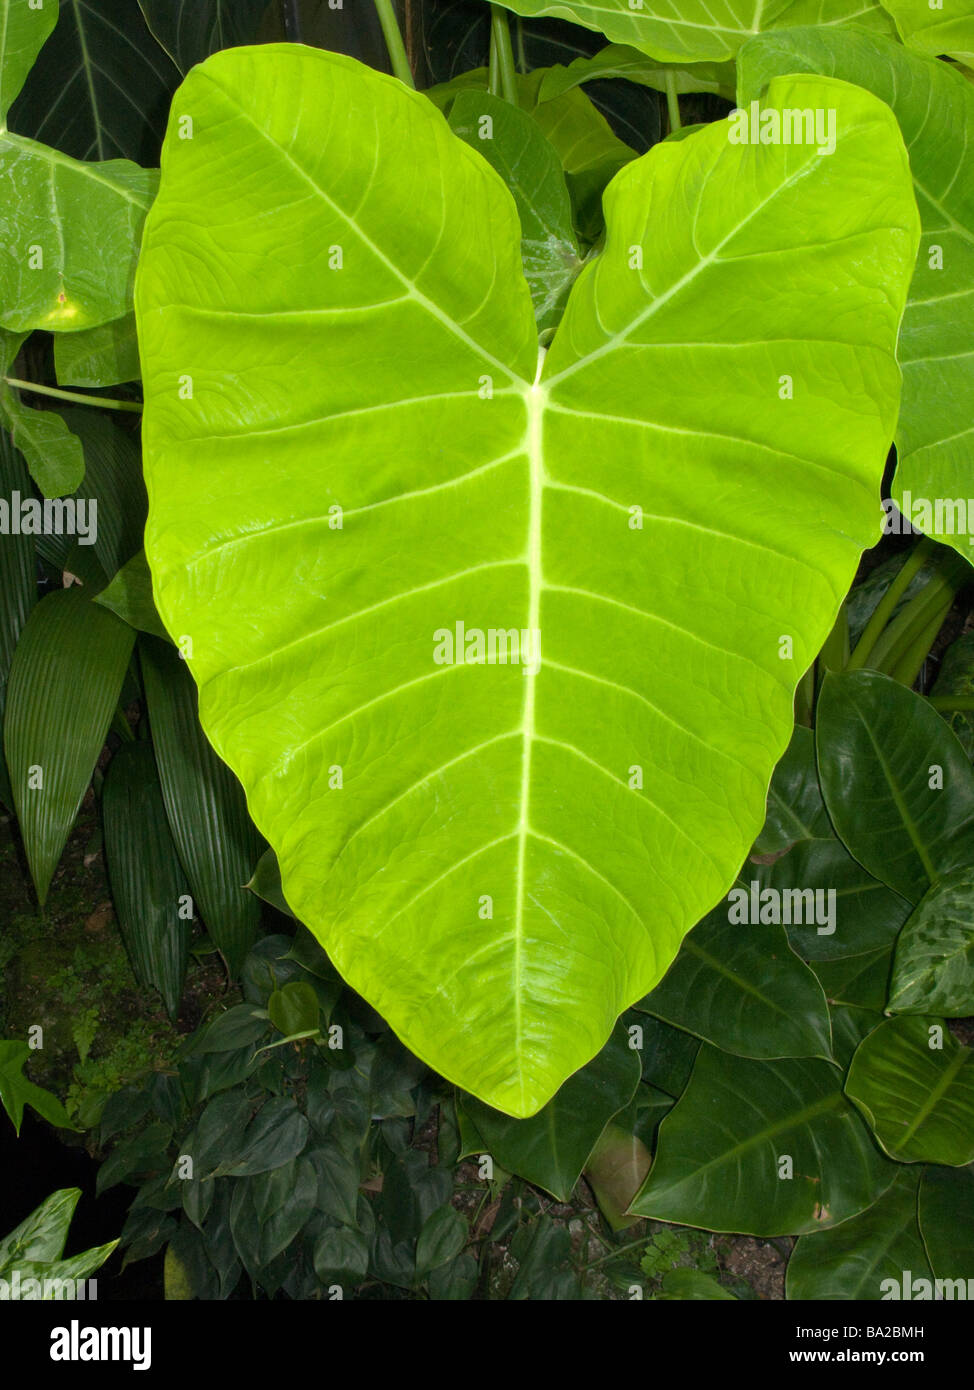 PHILODENDRON LEAF LONGWOOD BOTANICAL GARDENS KENNETT SQUARE CHESTER COUNTY PENNSYLVANIA USA Stock Photo